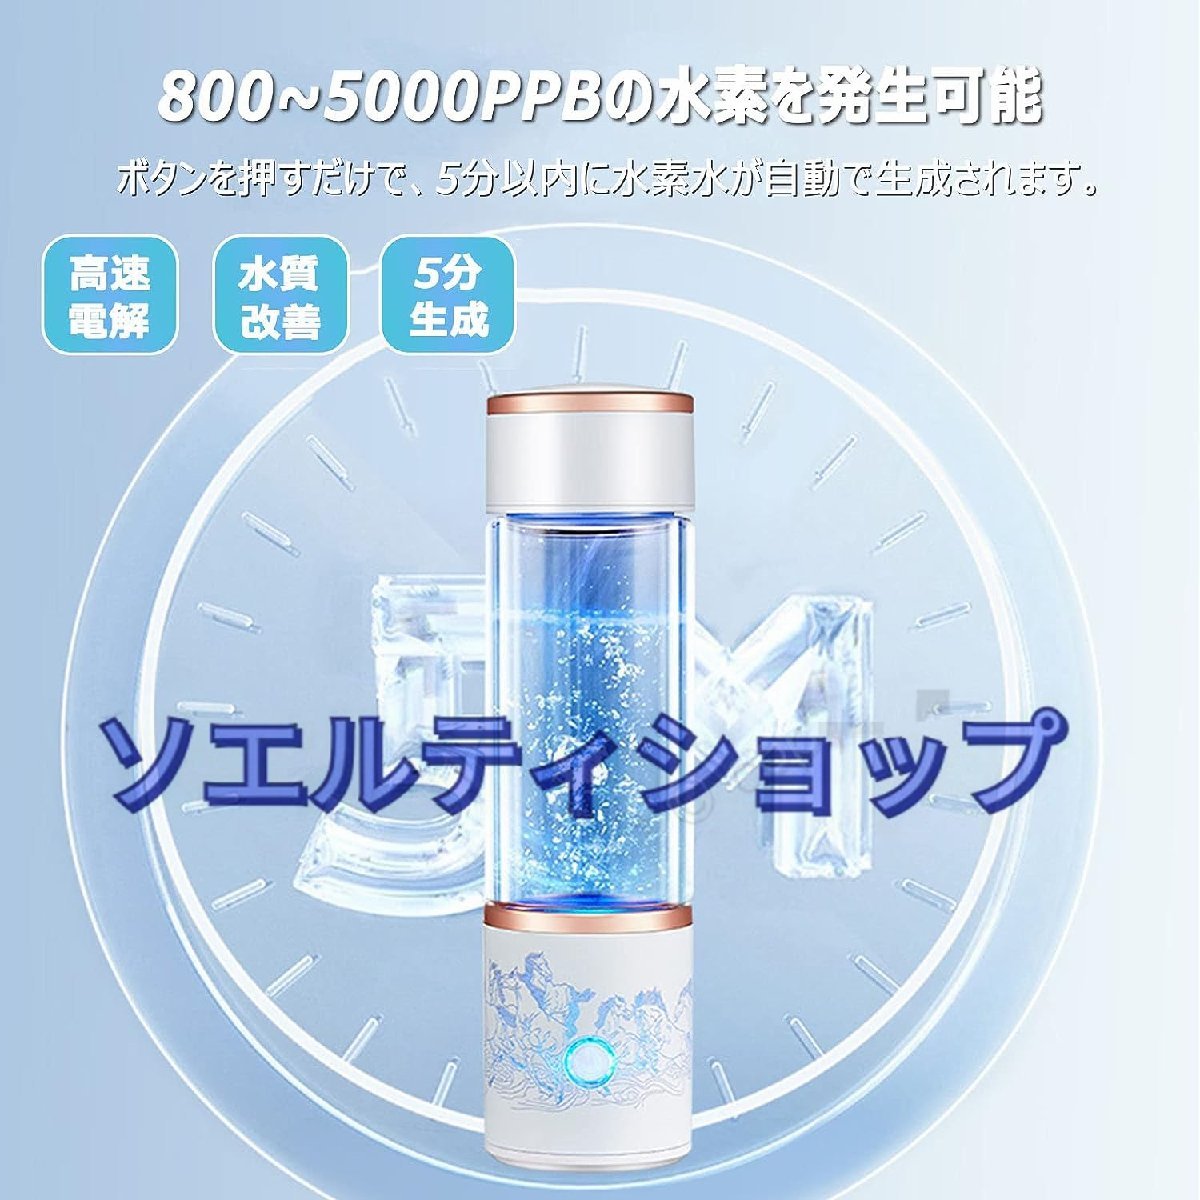  shop manager special selection * water element aquatic . vessel super high density water element water bottle 5000PPB one pcs three position 300ML cold water / hot water circulation bottle type electrolysis water machine ... beauty health portable 